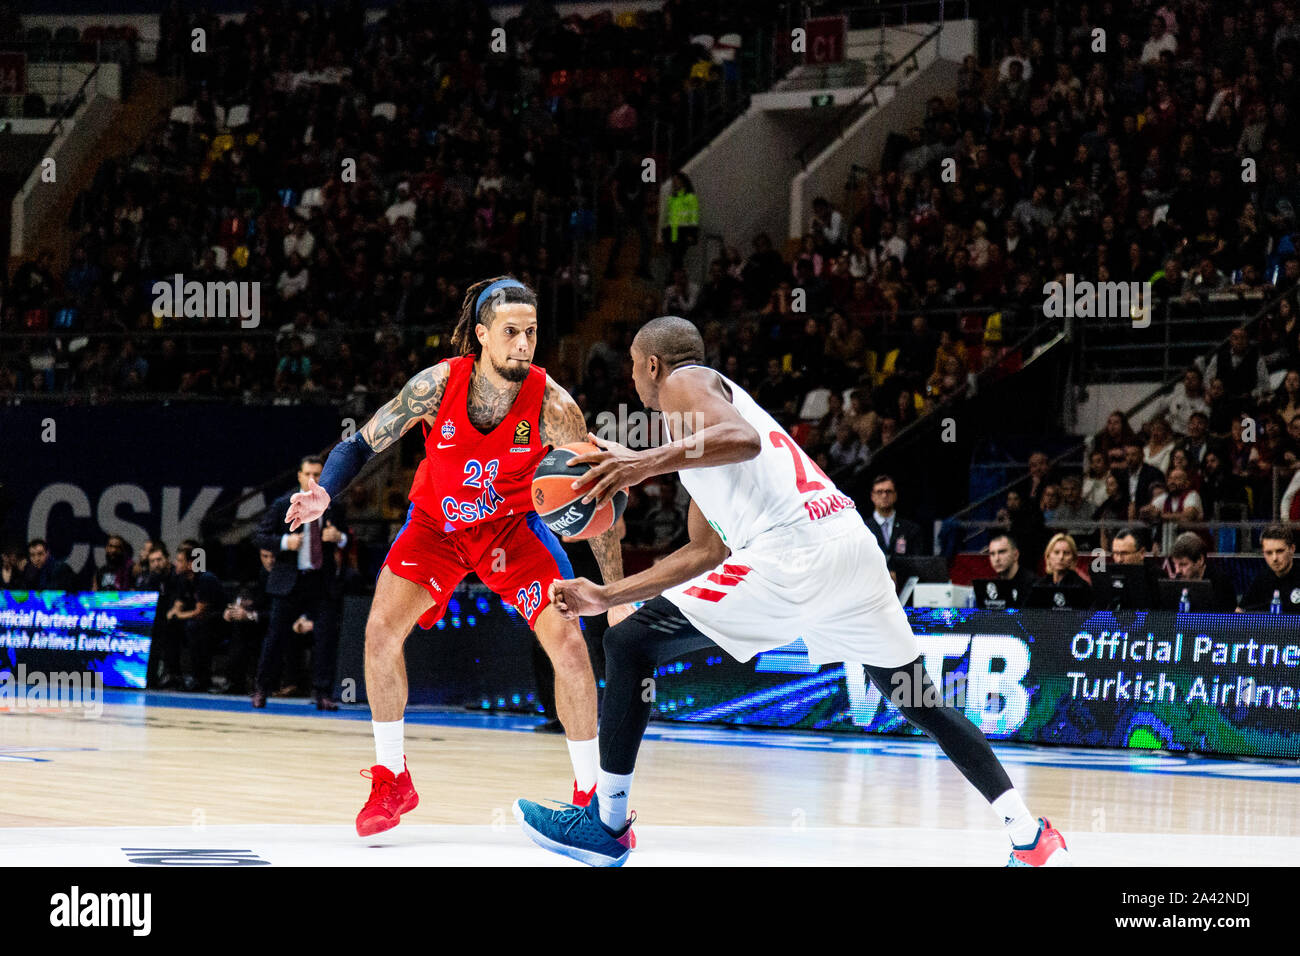 Demarcus Nelson, #20 of Bayern Munich in action against CSKA Moscow during the Turkish Airlines Euroleague Opening game of the 2019-2020 season.Final Score: CSKA Moscow 79 – 68 Bayern Munich. Stock Photo